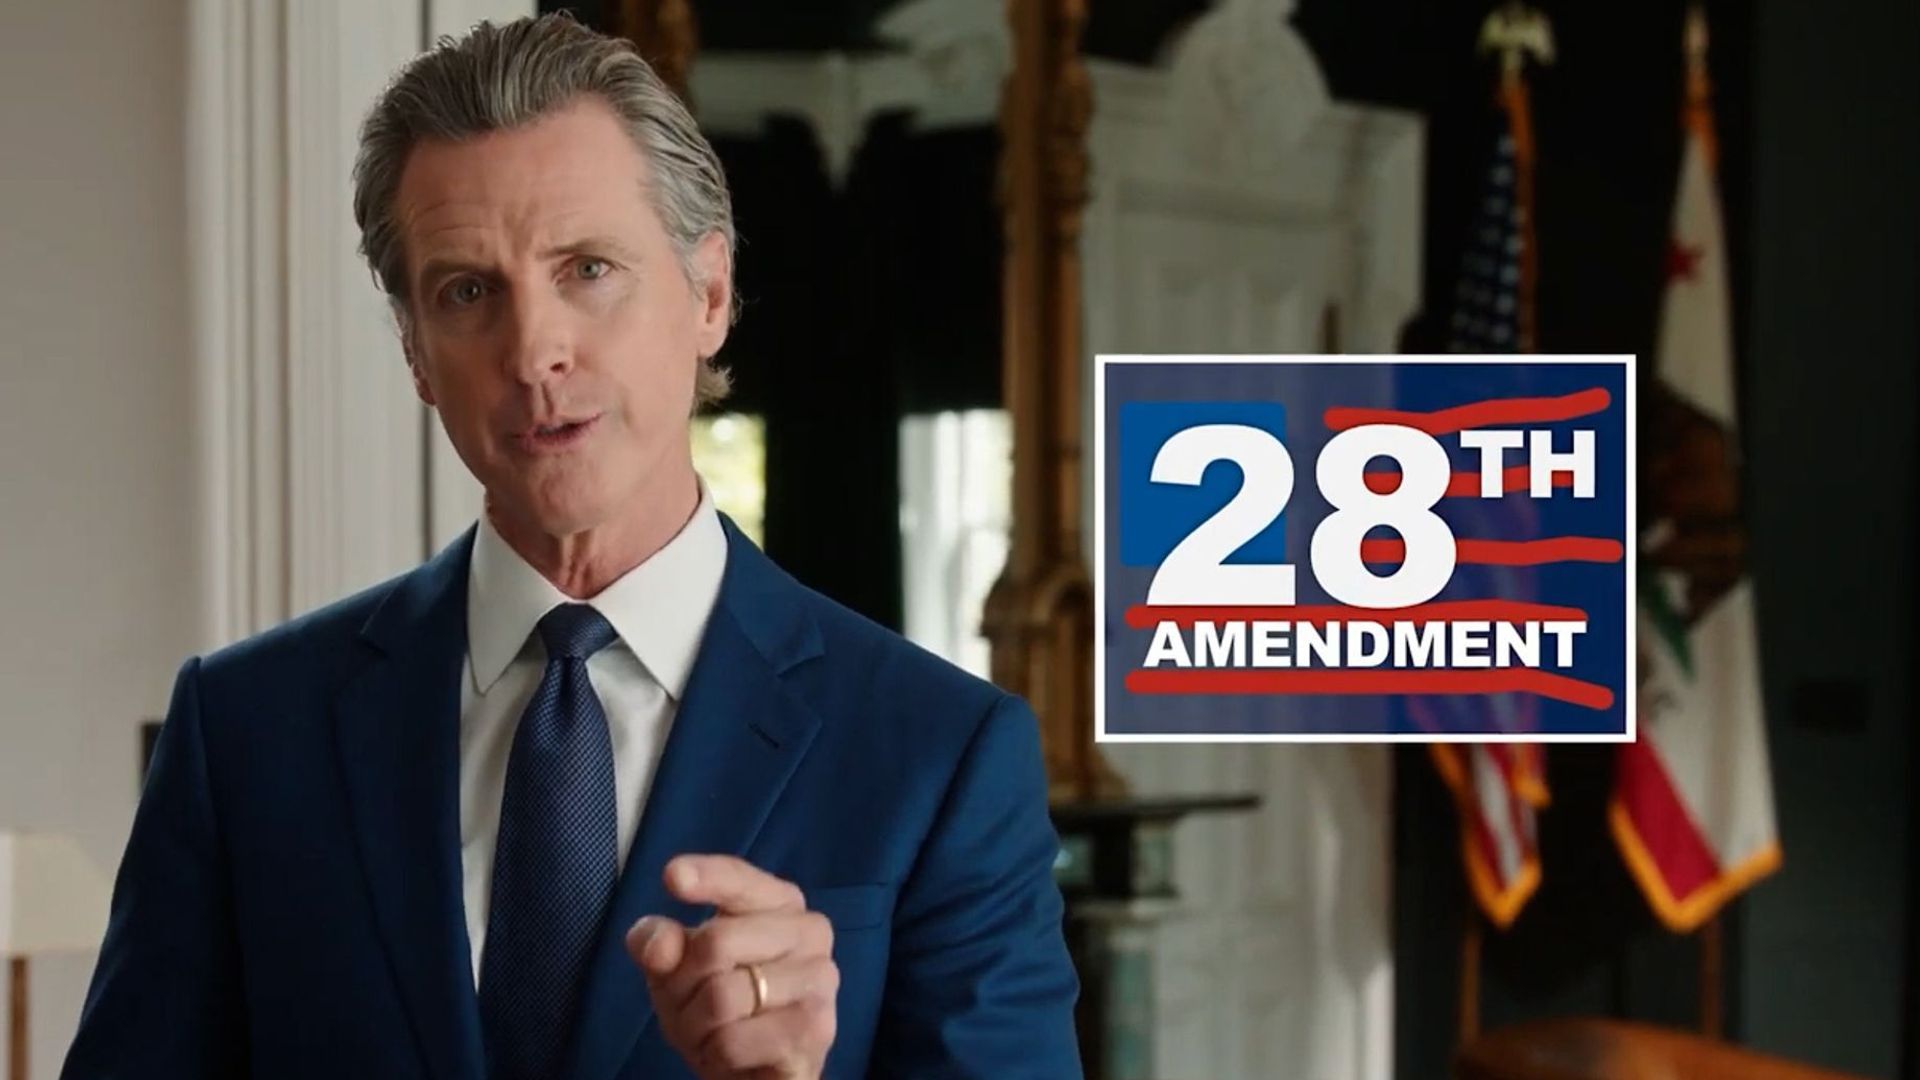 California Gov. Gavin Newsom is calling for a federal constitutional convention to consider the 28th amendment. A law professor explains what that means.